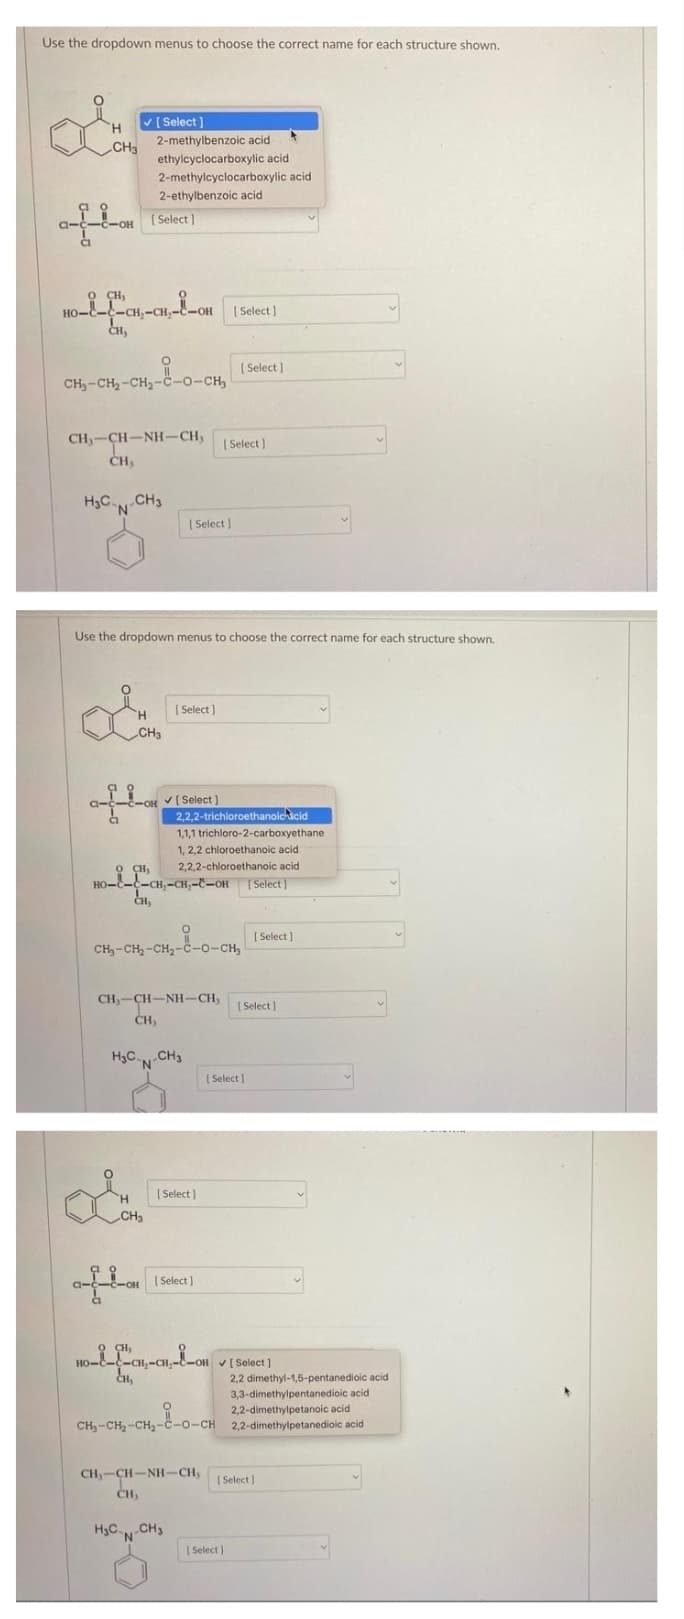 Use the dropdown menus to choose the correct name for each structure shown.
V
[ Select ]
H.
2-methylbenzoic acid
CH3
ethylcyclocarboxylic acid
2-methylcyclocarboxylic acid
2-ethylbenzoic acid
( Select )
-C-OH
O CH,
-CH,-C
[ Select]
CH,
| Select )
CH,-CH-CH2-c-o-CH,
CH-CH-NH-CH,
CH,
| Select )
H3C CH3
'N
| elect ]
Use the dropdown menus to choose the correct name for each structure shown,
( Select )
H.
CH3
COH V[ Select )
2,2,2-trichloroethanoicacid
1,1,1 trichloro-2-carboxyethane
1, 2,2 chloroethanoic acid
2,2,2-chloroethanoic acid
O CH,
но---сн,-сн,--он [Select
CH,
( Select ]
CH-CH, -CH2-č-o-CH,
CH,-CH-NH-CH,
[ Select ]
CH,
H3C CH3
[ Select
[ Select)
H.
CH3
[ Select)
-c-OH
CH,
HO-E-C-CH,-CH,
CH,
OH [Select )
2,2 dimethyl-1,5-pentanedioic acid
3,3-dimethylpentanedioic acid
2,2-dimethylpetanoic acid
CH,-CH, -CH2-c-o-CH 2,2-dimethylpetanedioic acid
CH,-CH-NH-CH,
CH,
( Select]
H3C CH3
'N'
[ Select )
